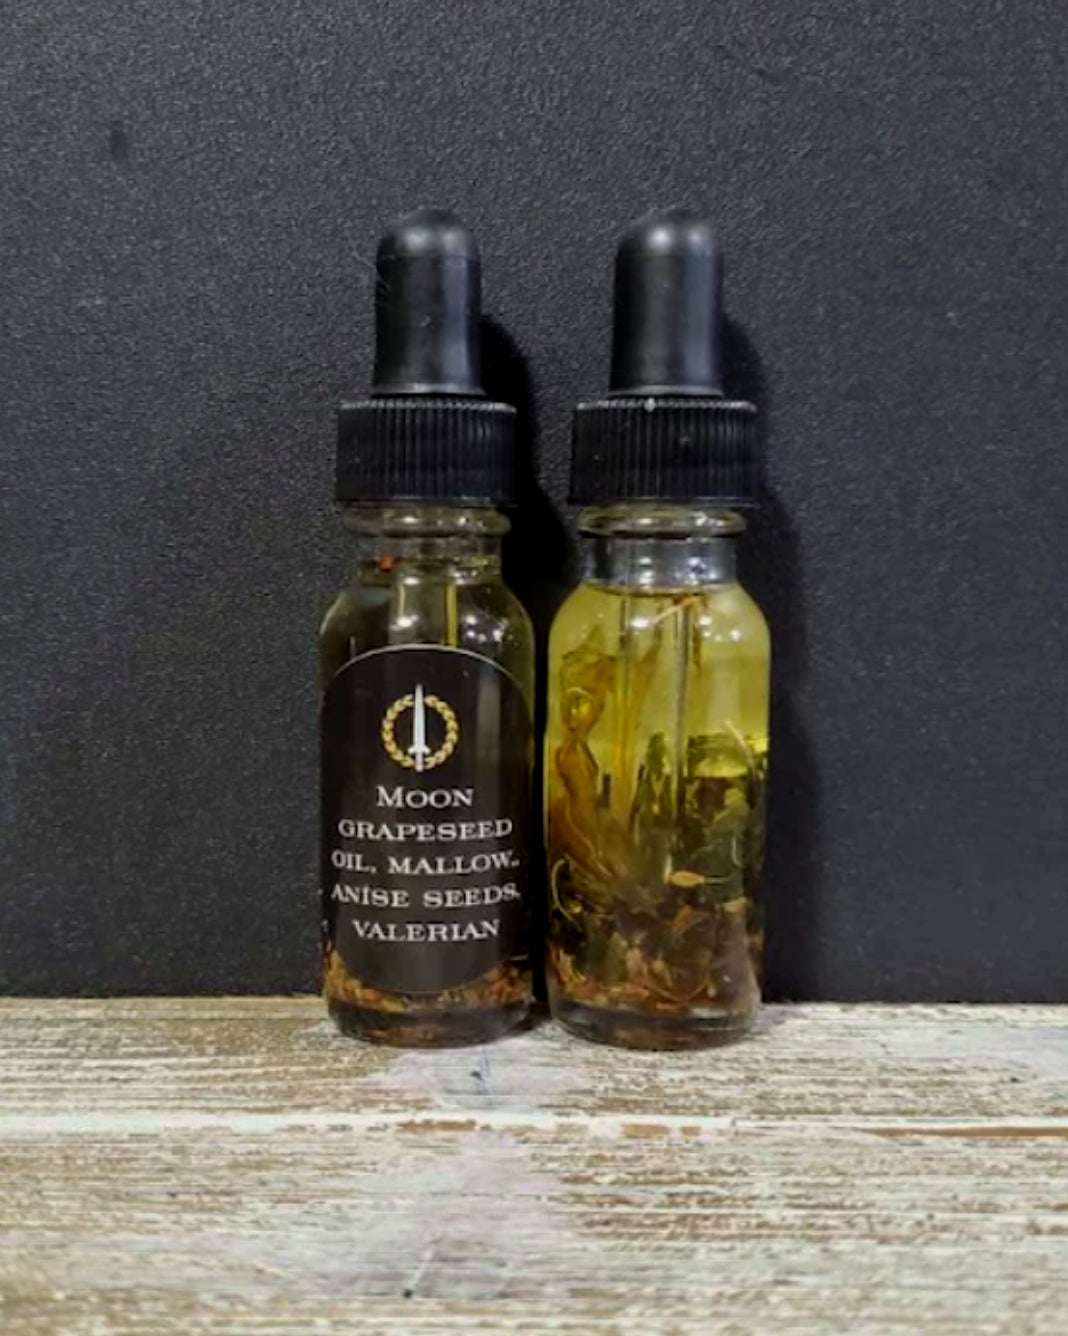 A bottle of ritual oil infused with herbs. For use in planetary magic and witchcraft. 